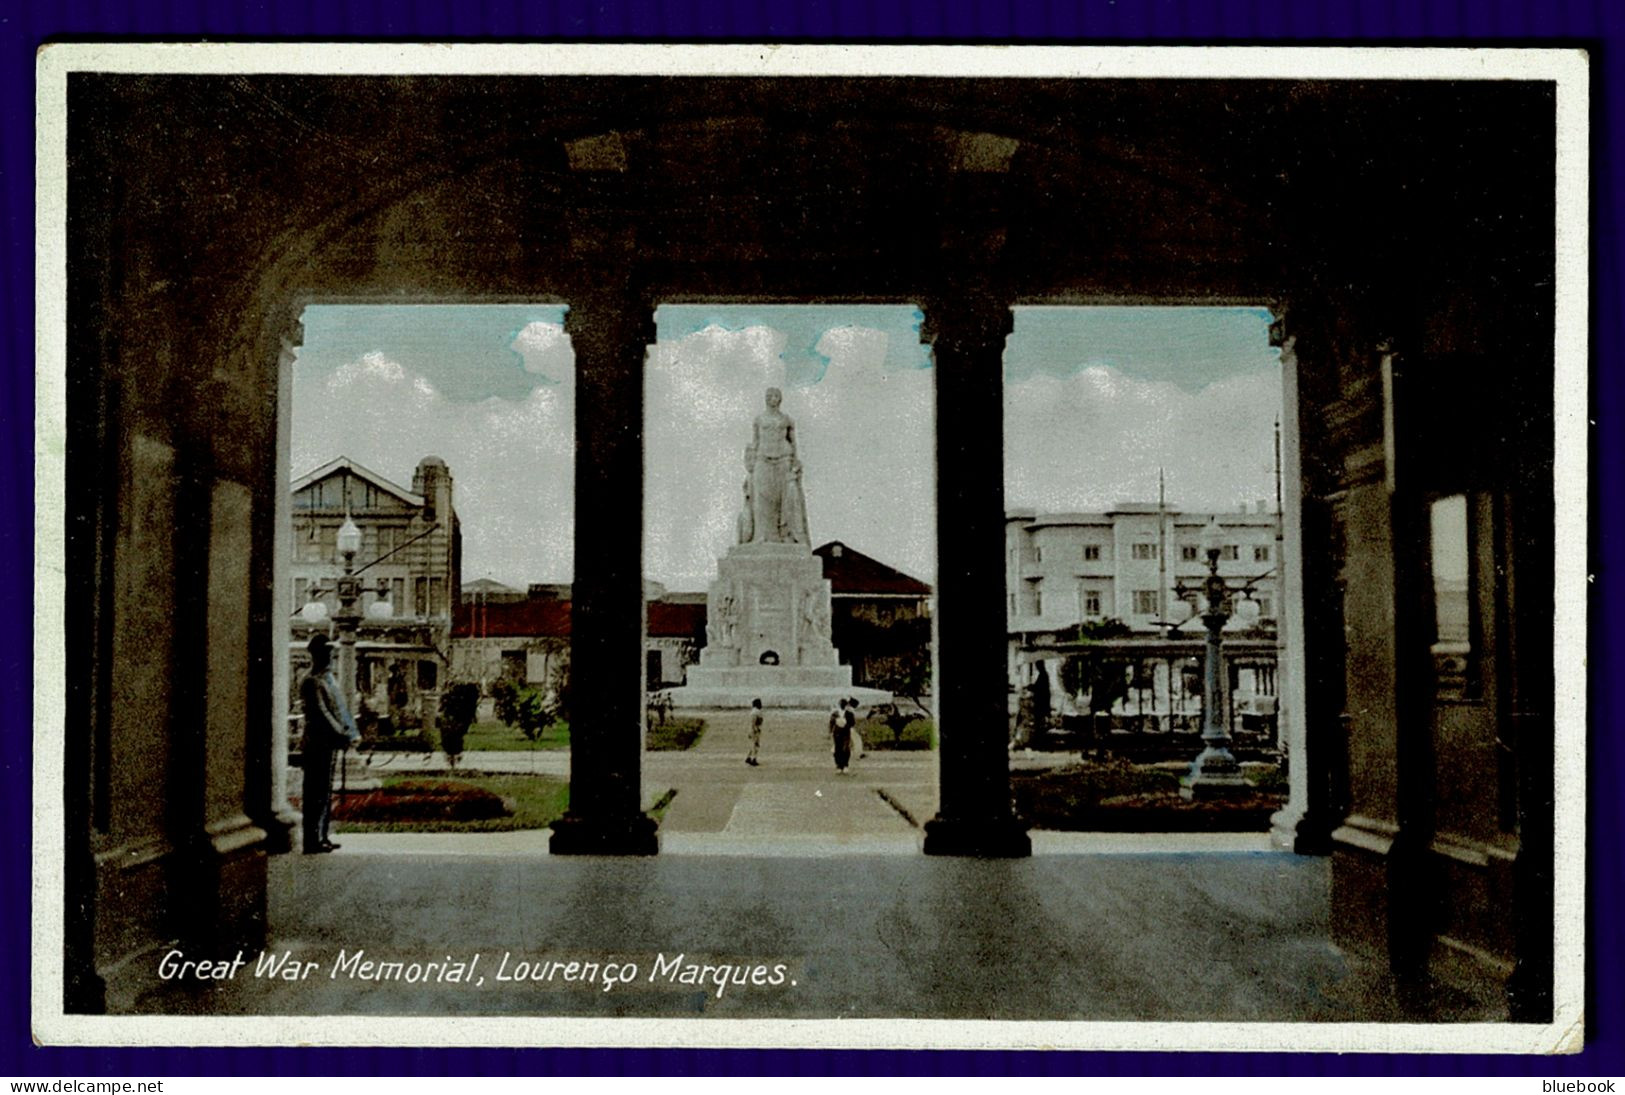 Ref 1639 - Early Postcard - Great War Memorial Laurenco Marques - Mozambique Africa - Mosambik